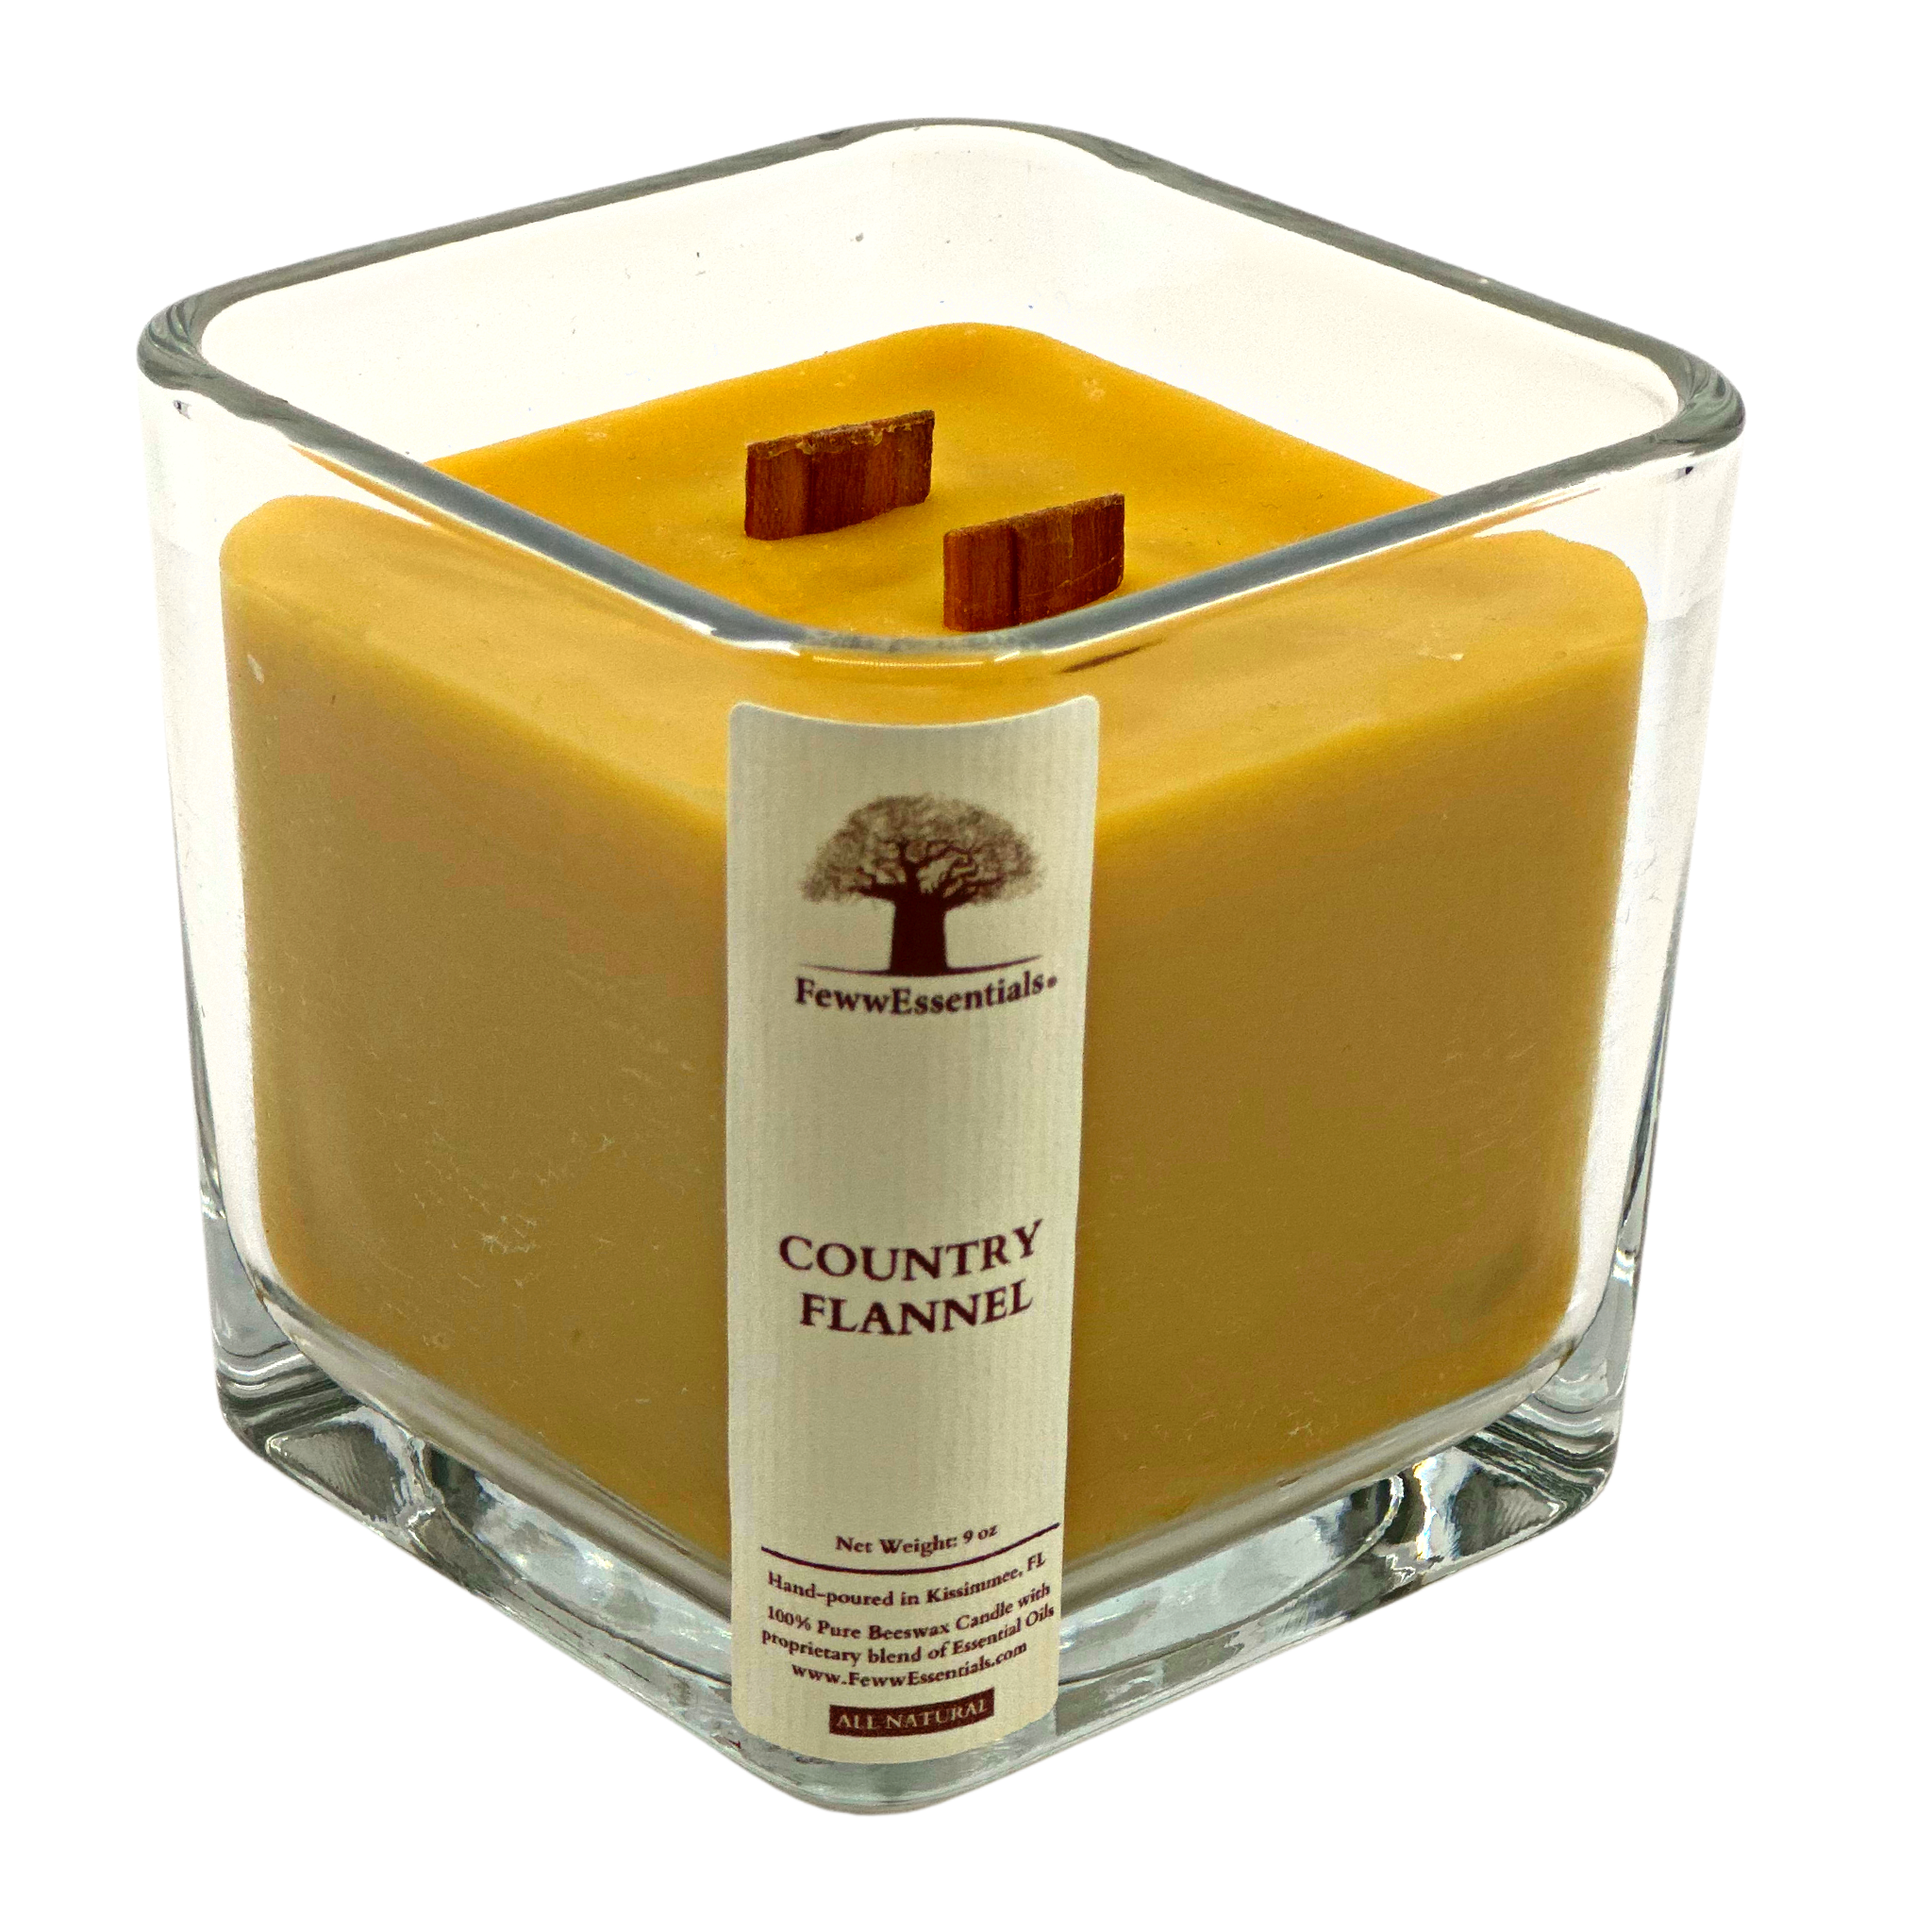 Beeswax Candles – The North Country